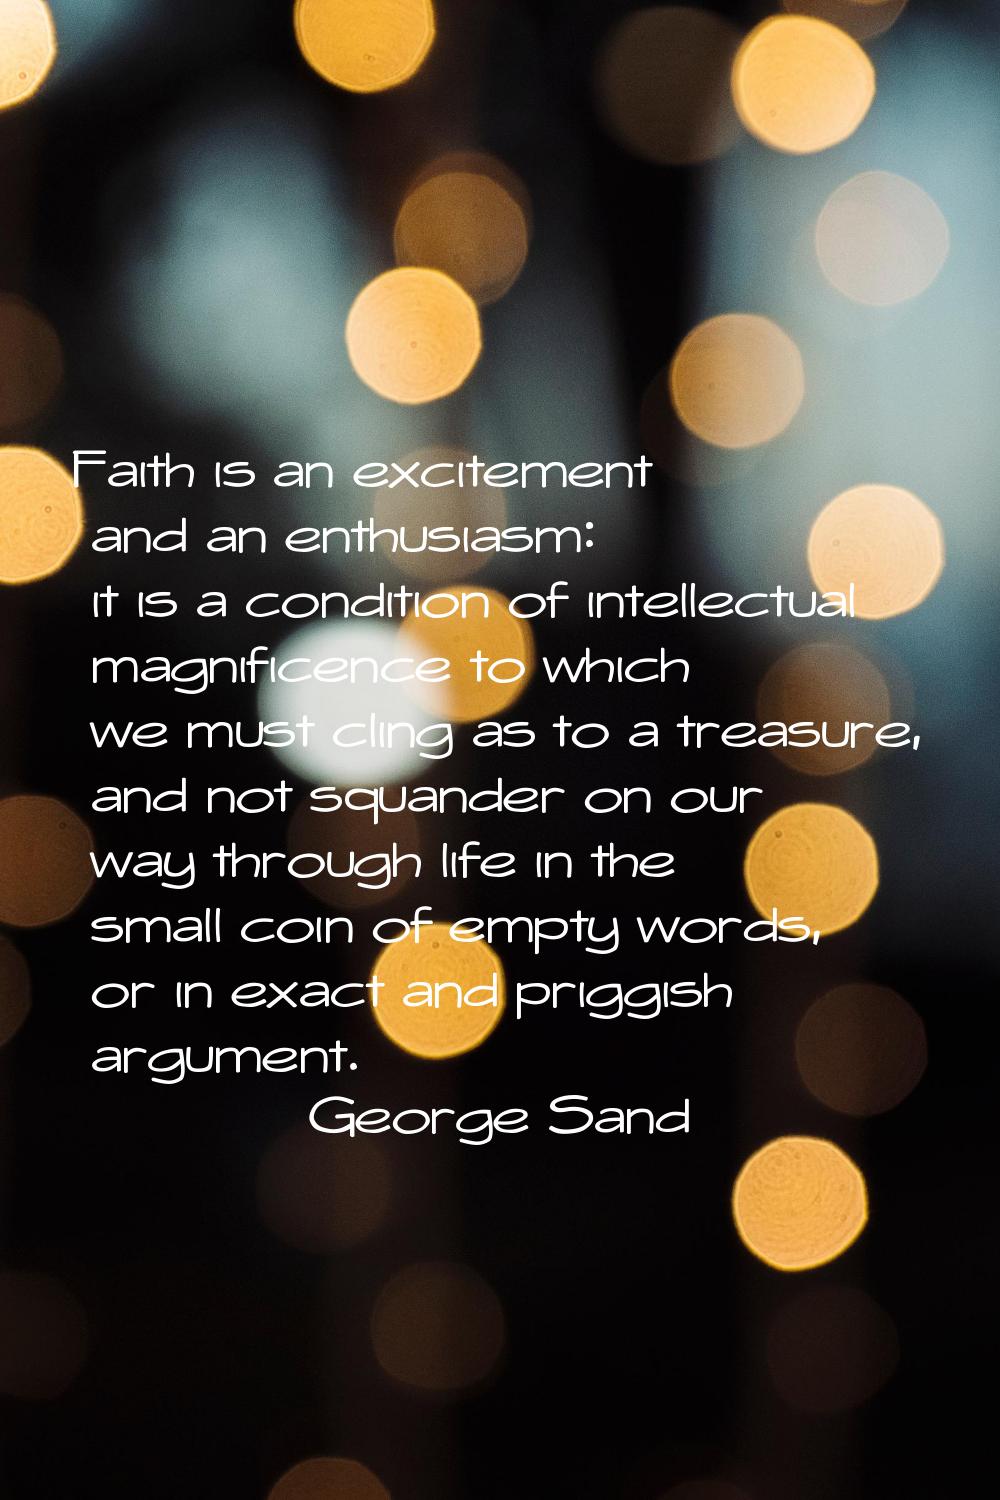 Faith is an excitement and an enthusiasm: it is a condition of intellectual magnificence to which w